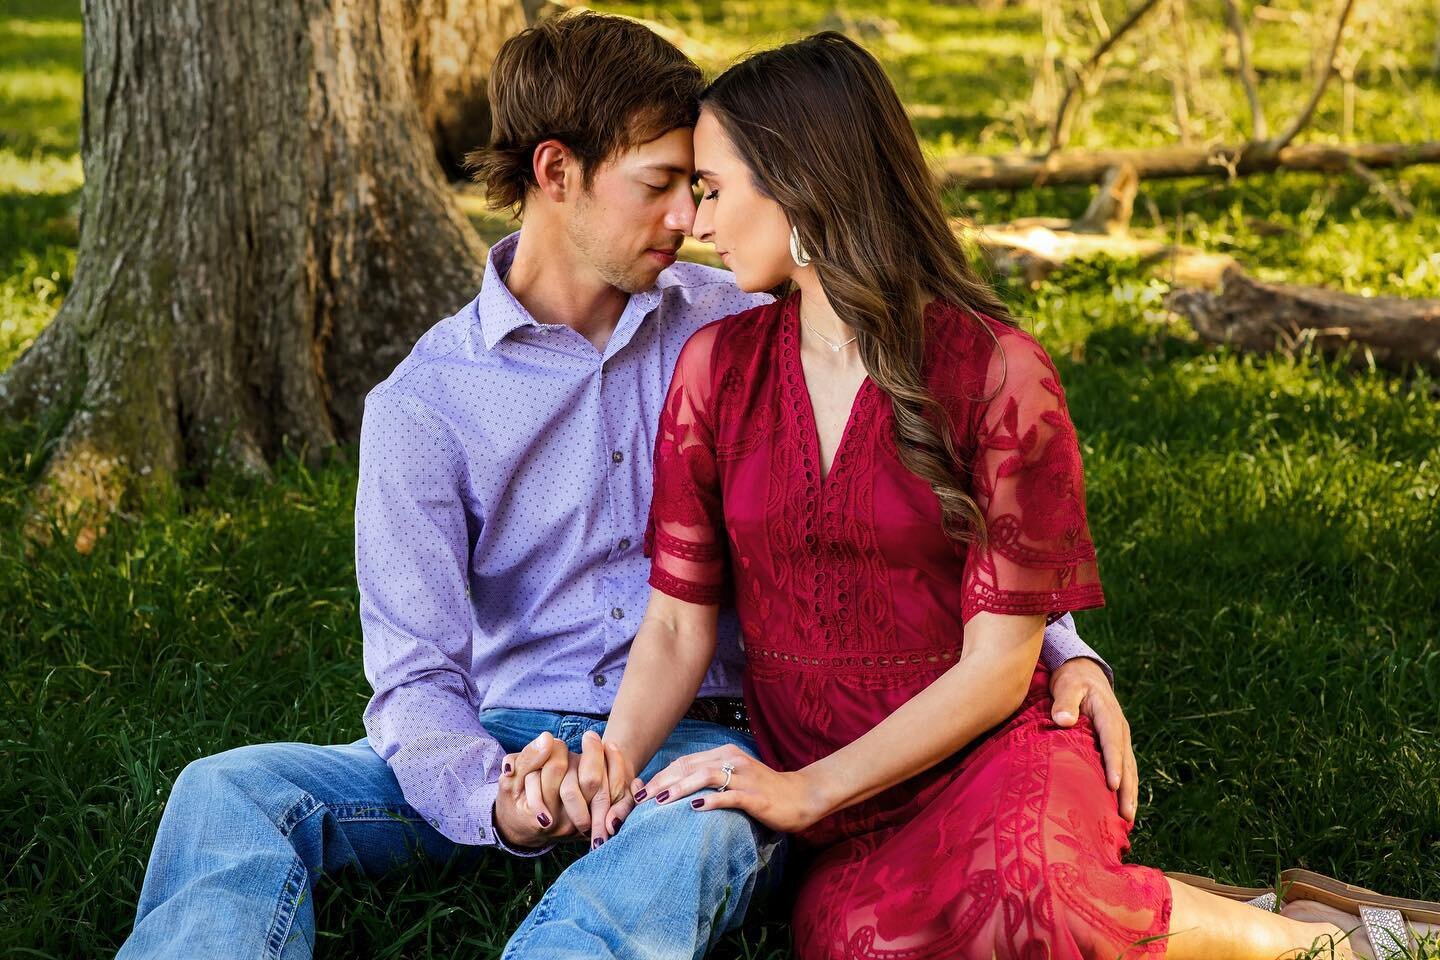 Y&rsquo;all. This engagement session was EVERYTHING! Normally I have the first image/sneak I want to edit when I get home already picked out in my head before the session is even over. But this! These two made it extremely hard for me. I had about 30